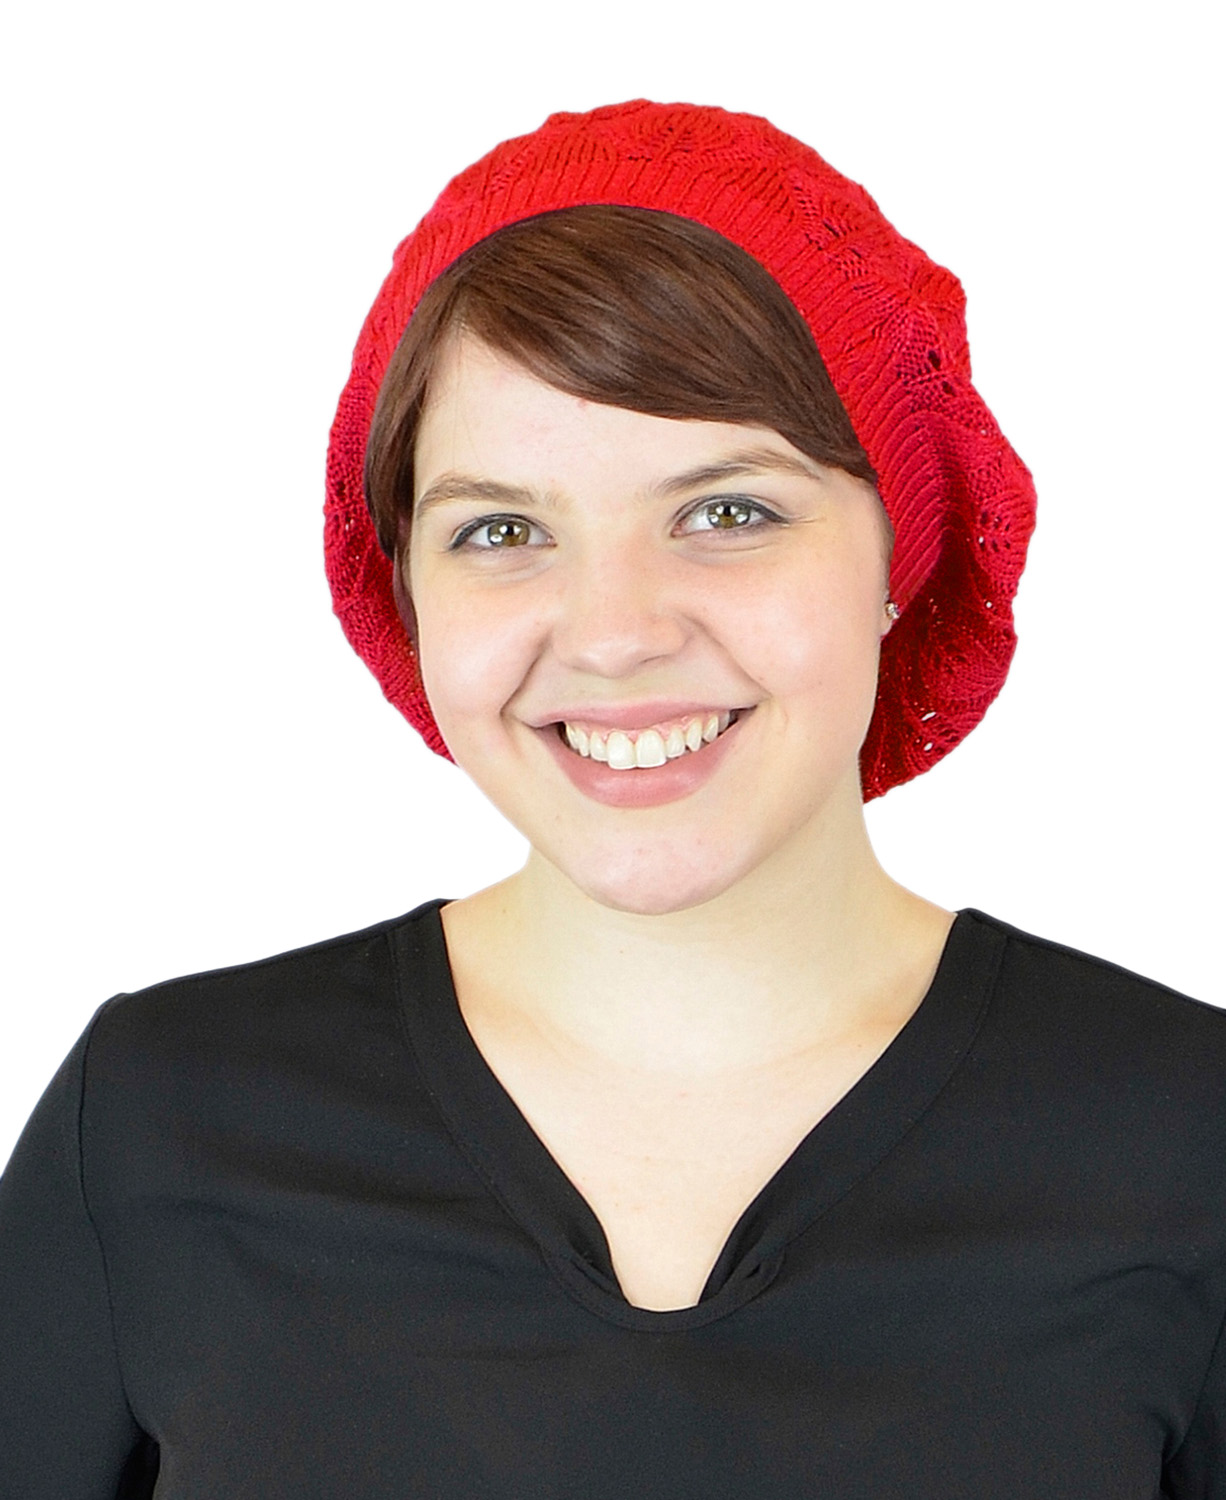 Belle Donne - Women's Mesh Crocheted Accented Stretch Beret Hat- Red 4020